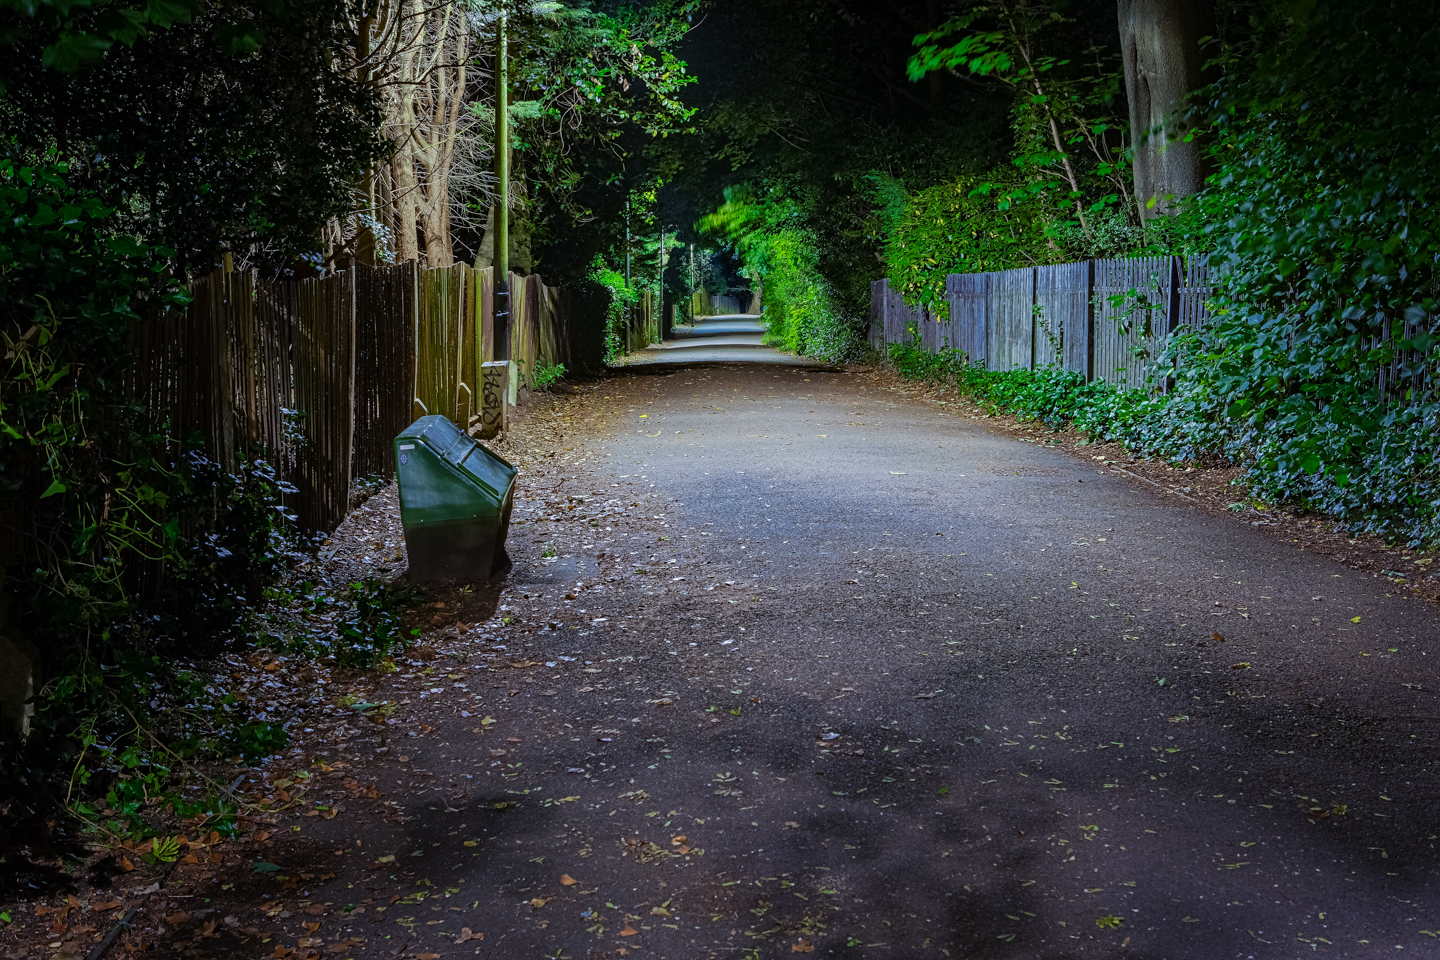 Crescent Wood Road looking down the path to Sydenham Hill station